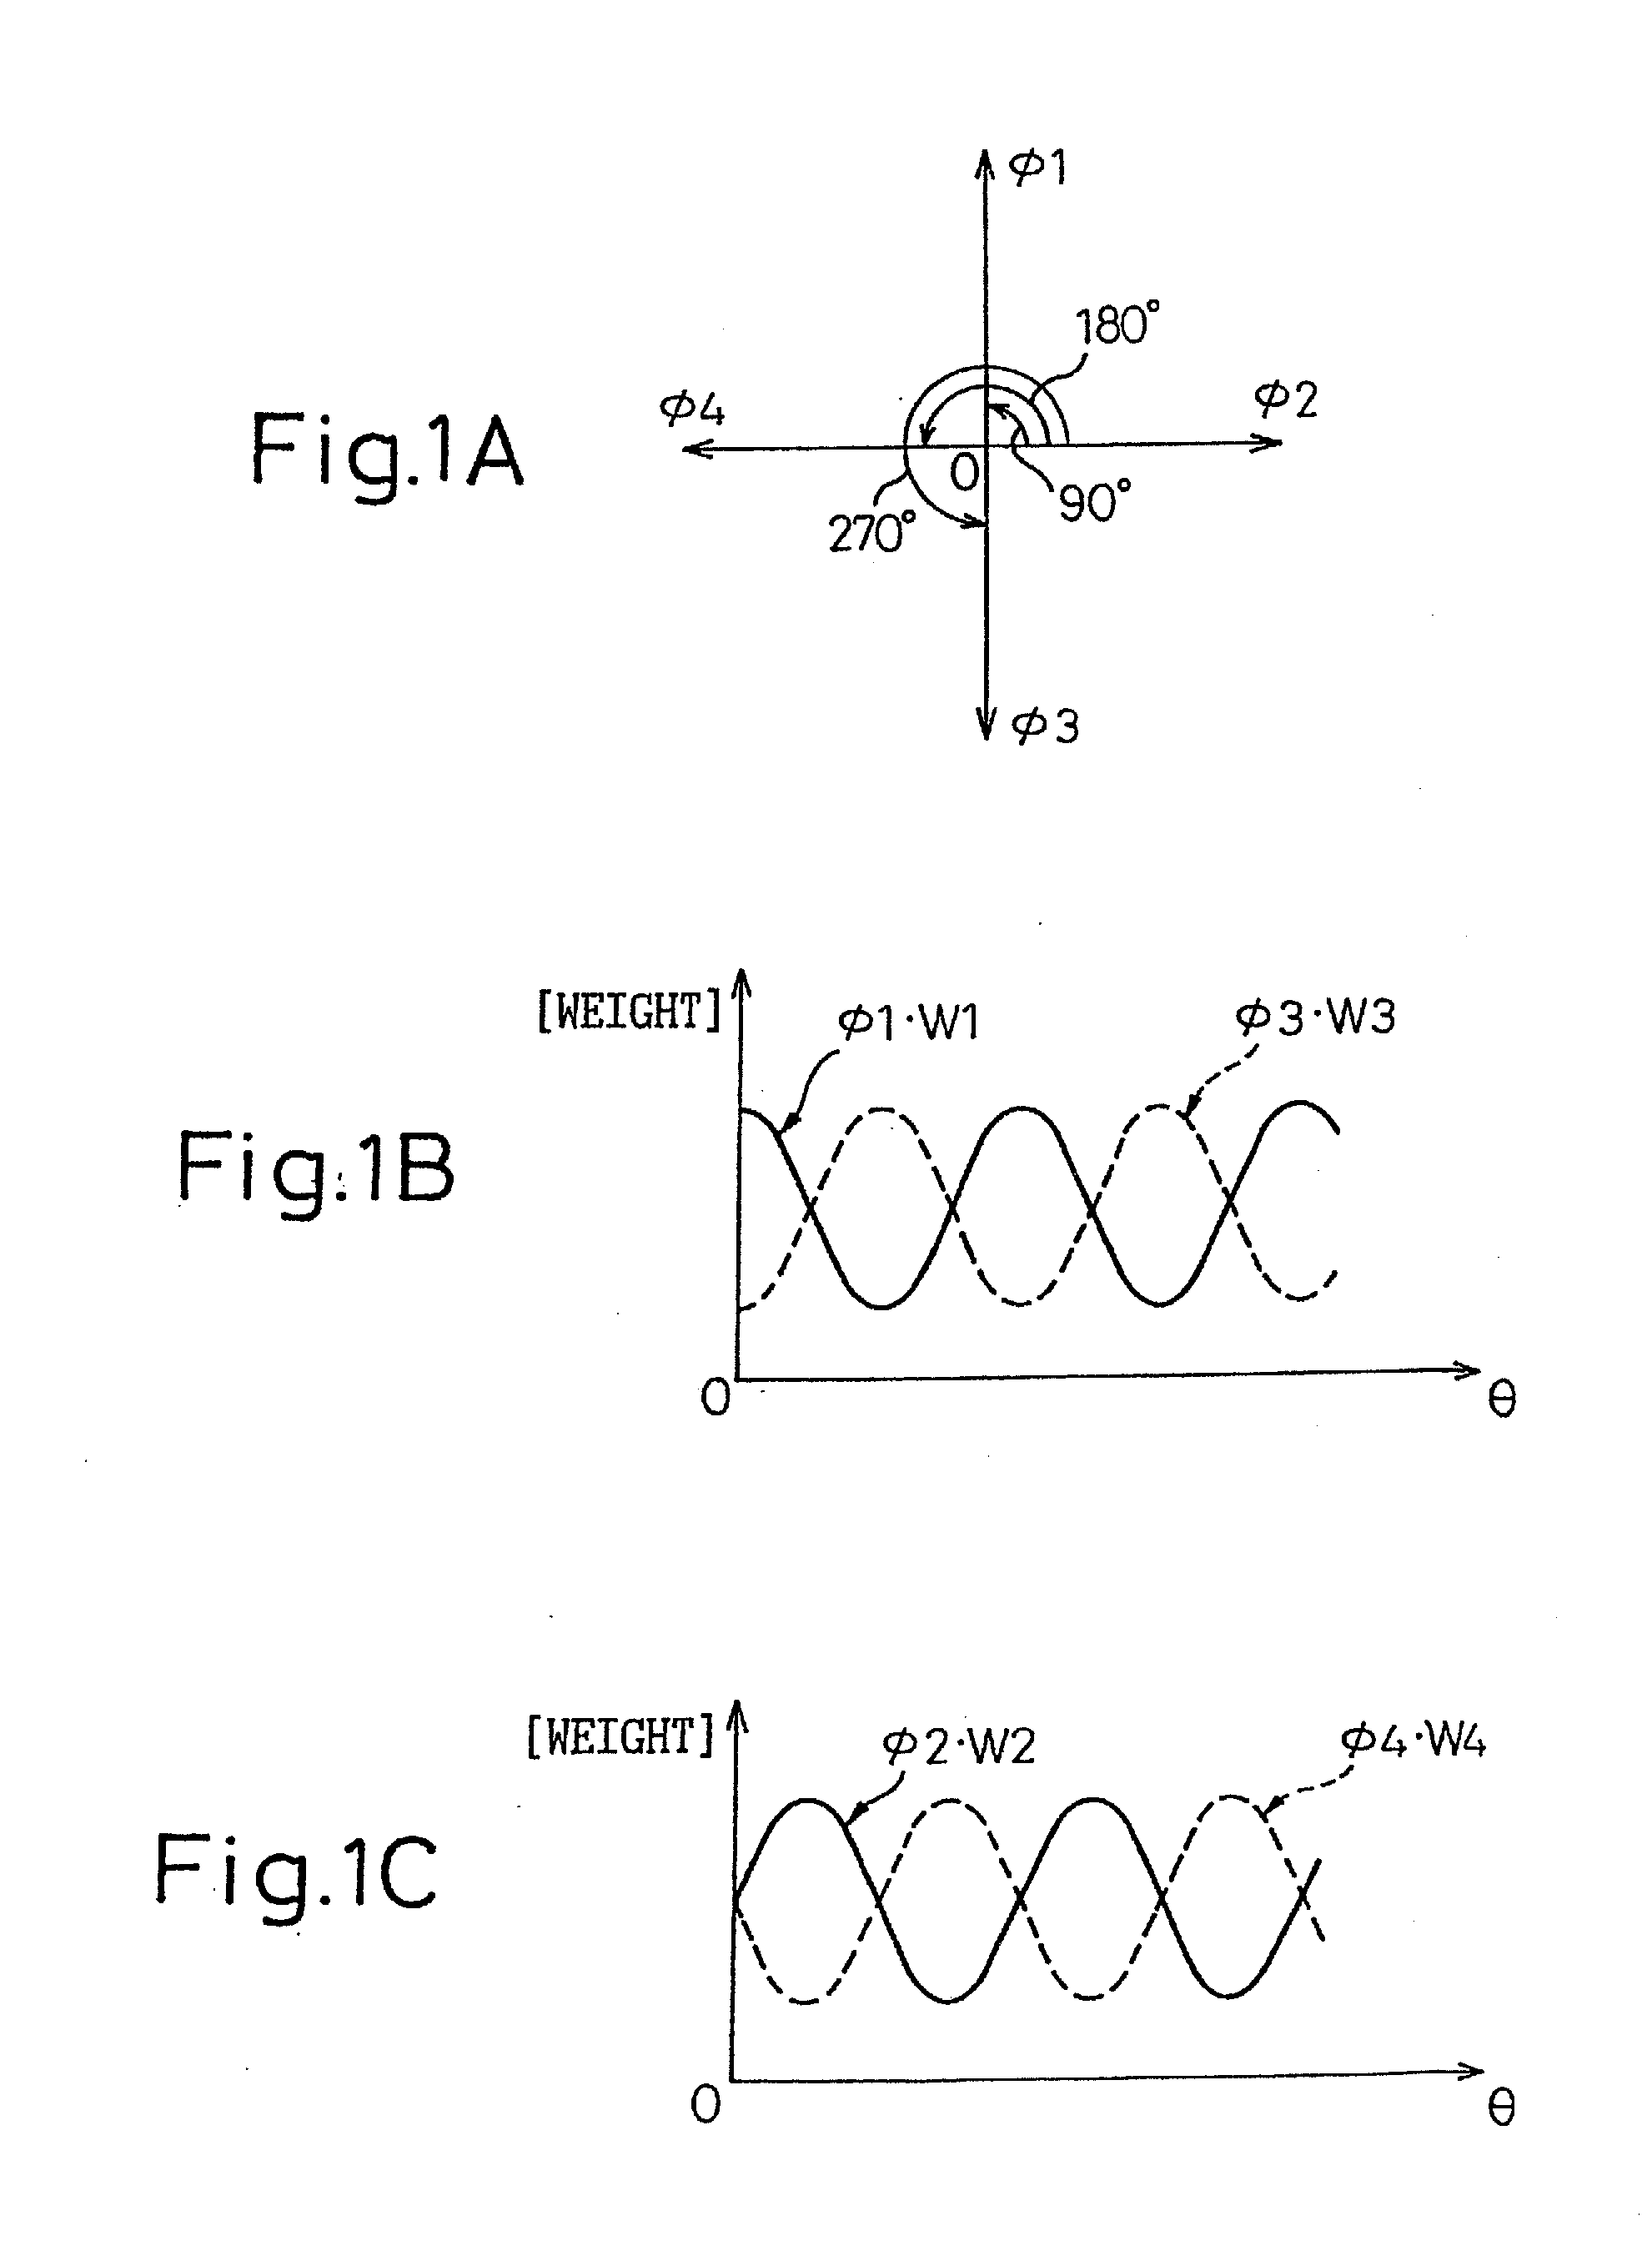 Phase-combining circuit and timing signal generator circuit for carrying out a high-speed signal transmission